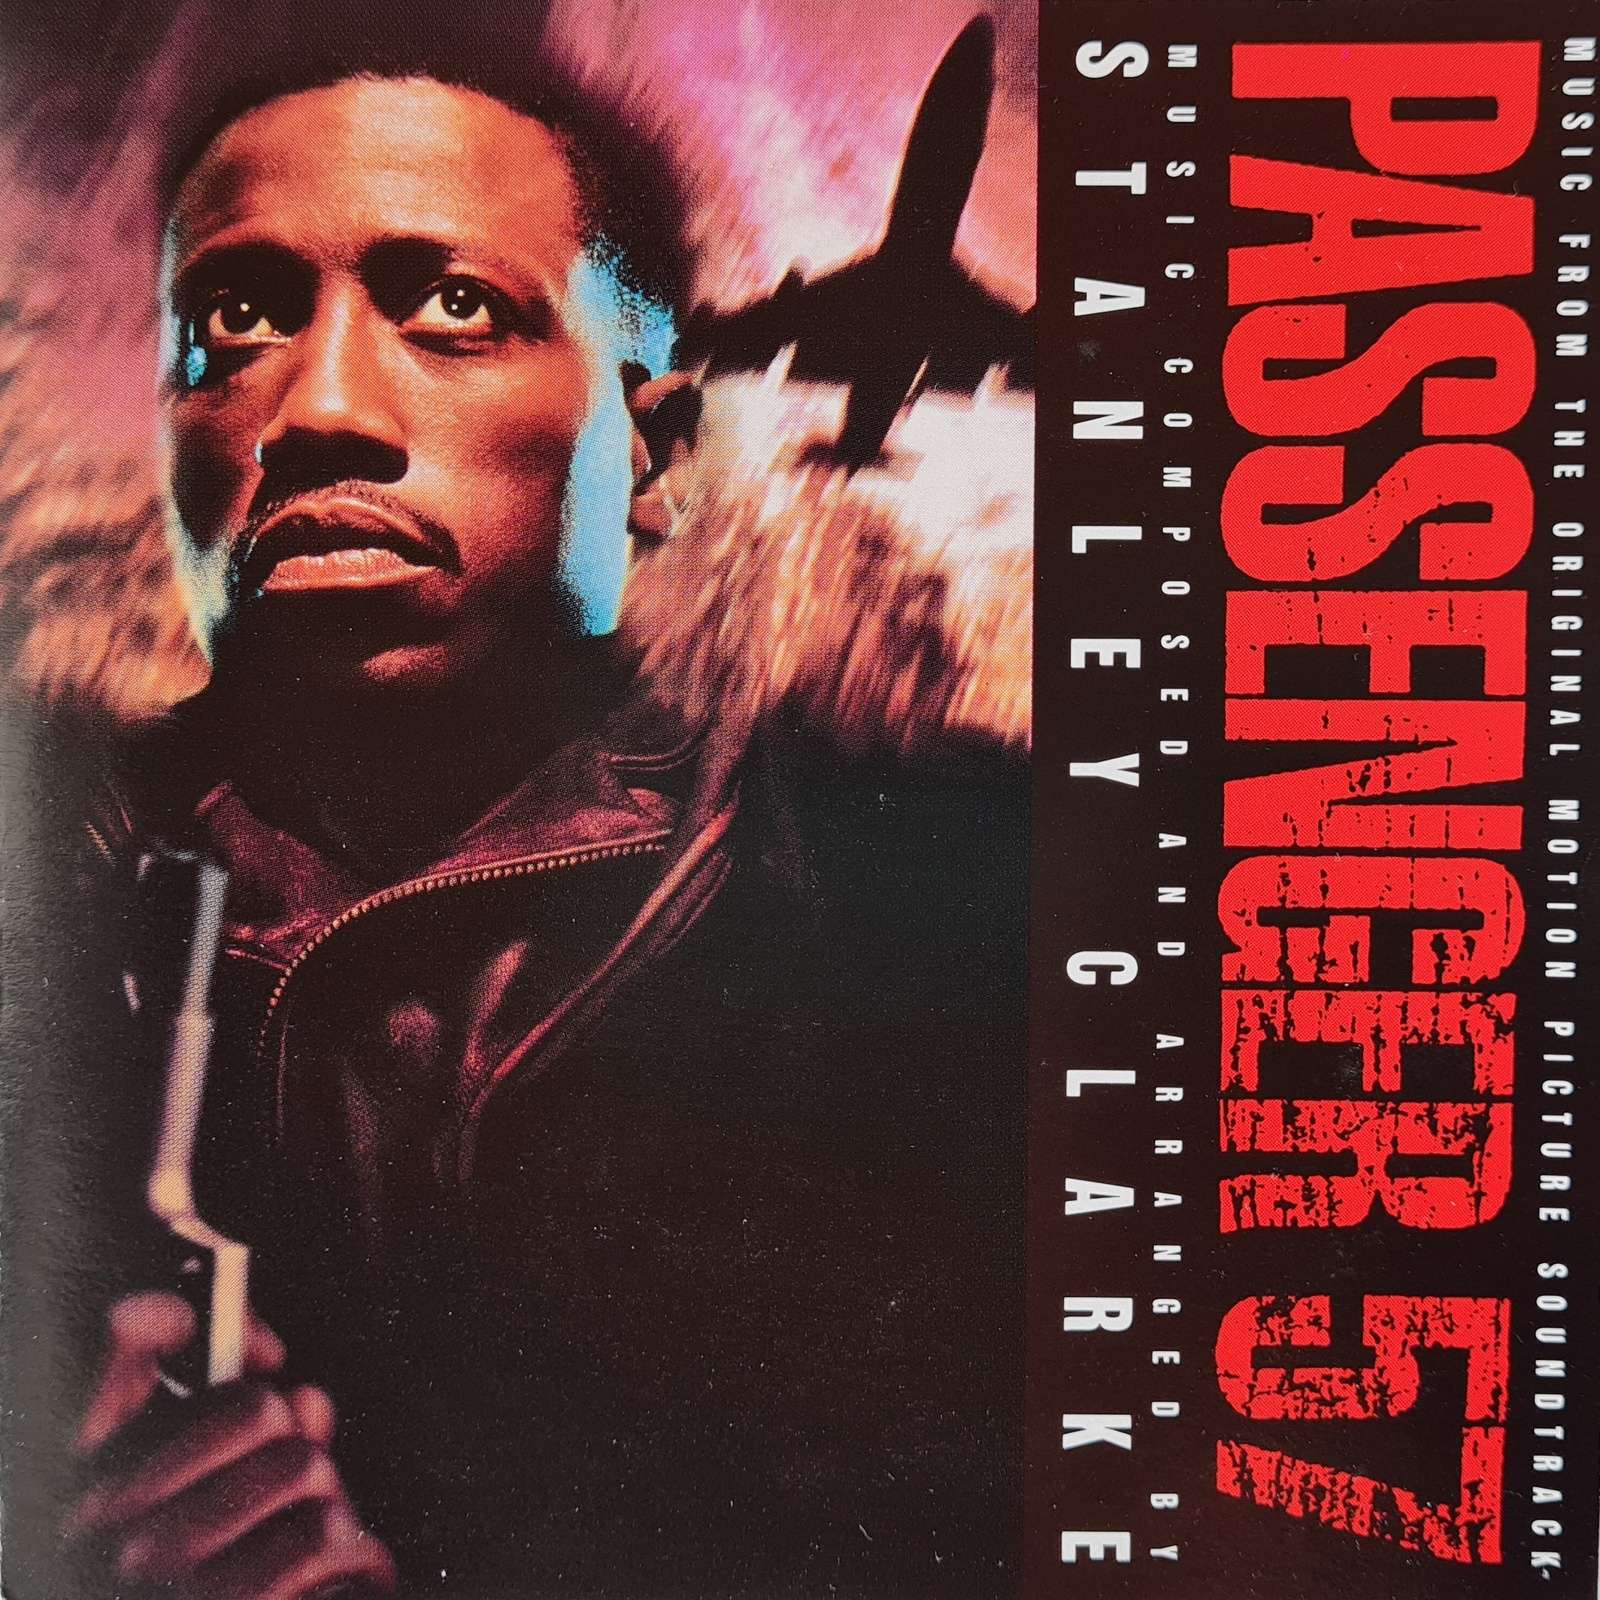 Passenger 57 - Music from the Original Motion Picture Soundtrack (CD)